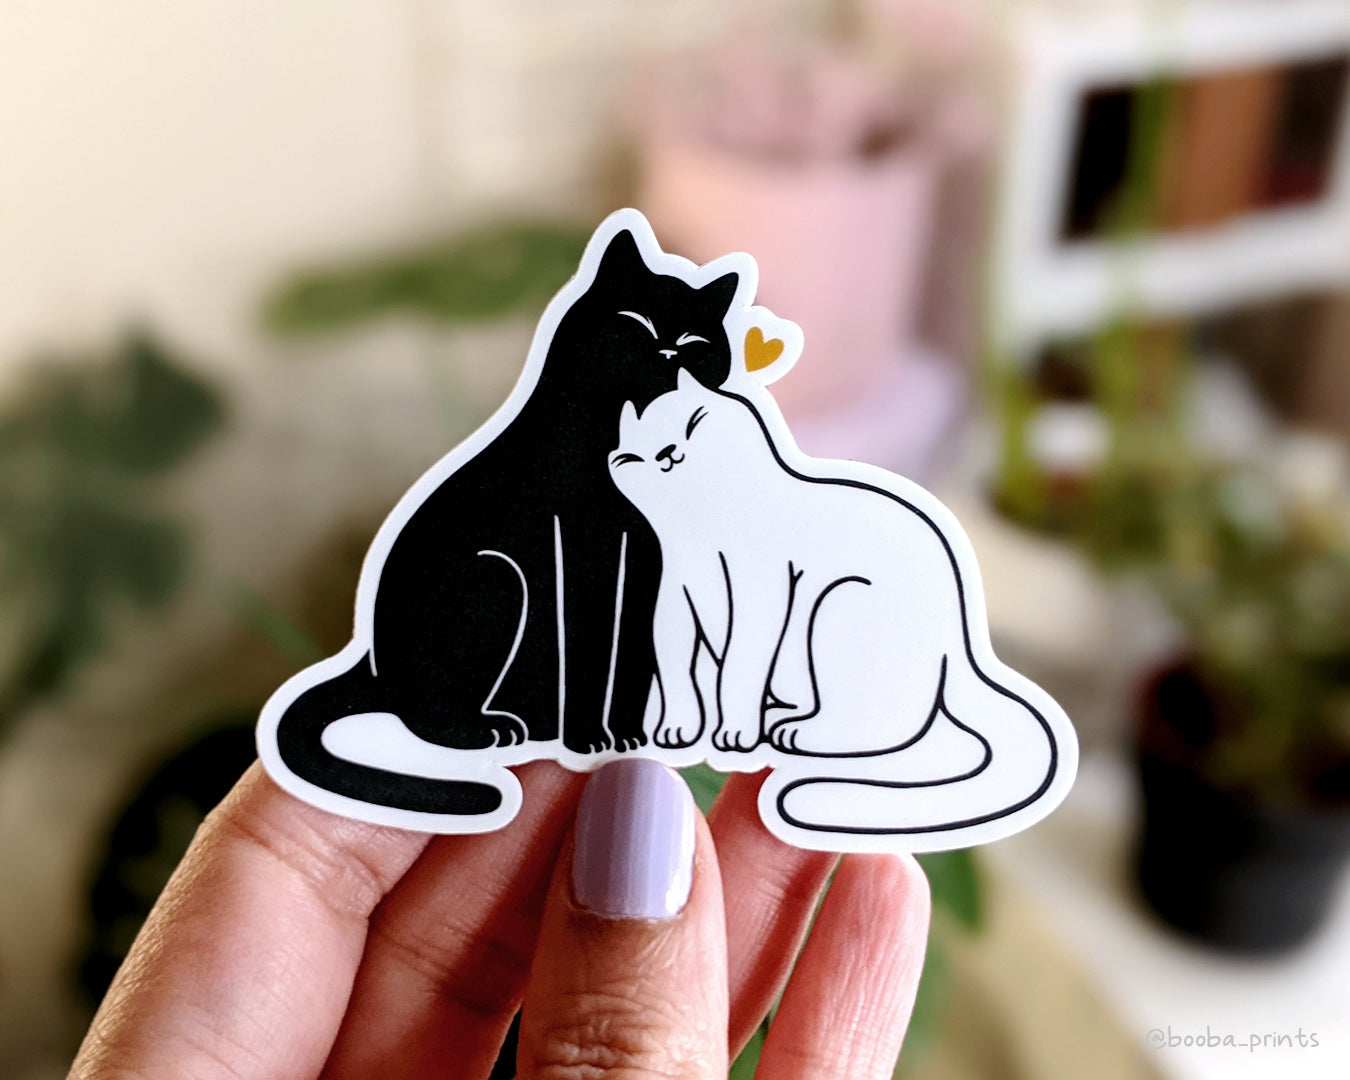 Snuggly Cats sticker. Vinyl sticker of cute cats and a heart. Waterproof sticker for a bottle, laptop or a notebook. Cute cat sticker. Cat lover sticker by Booba Prints.